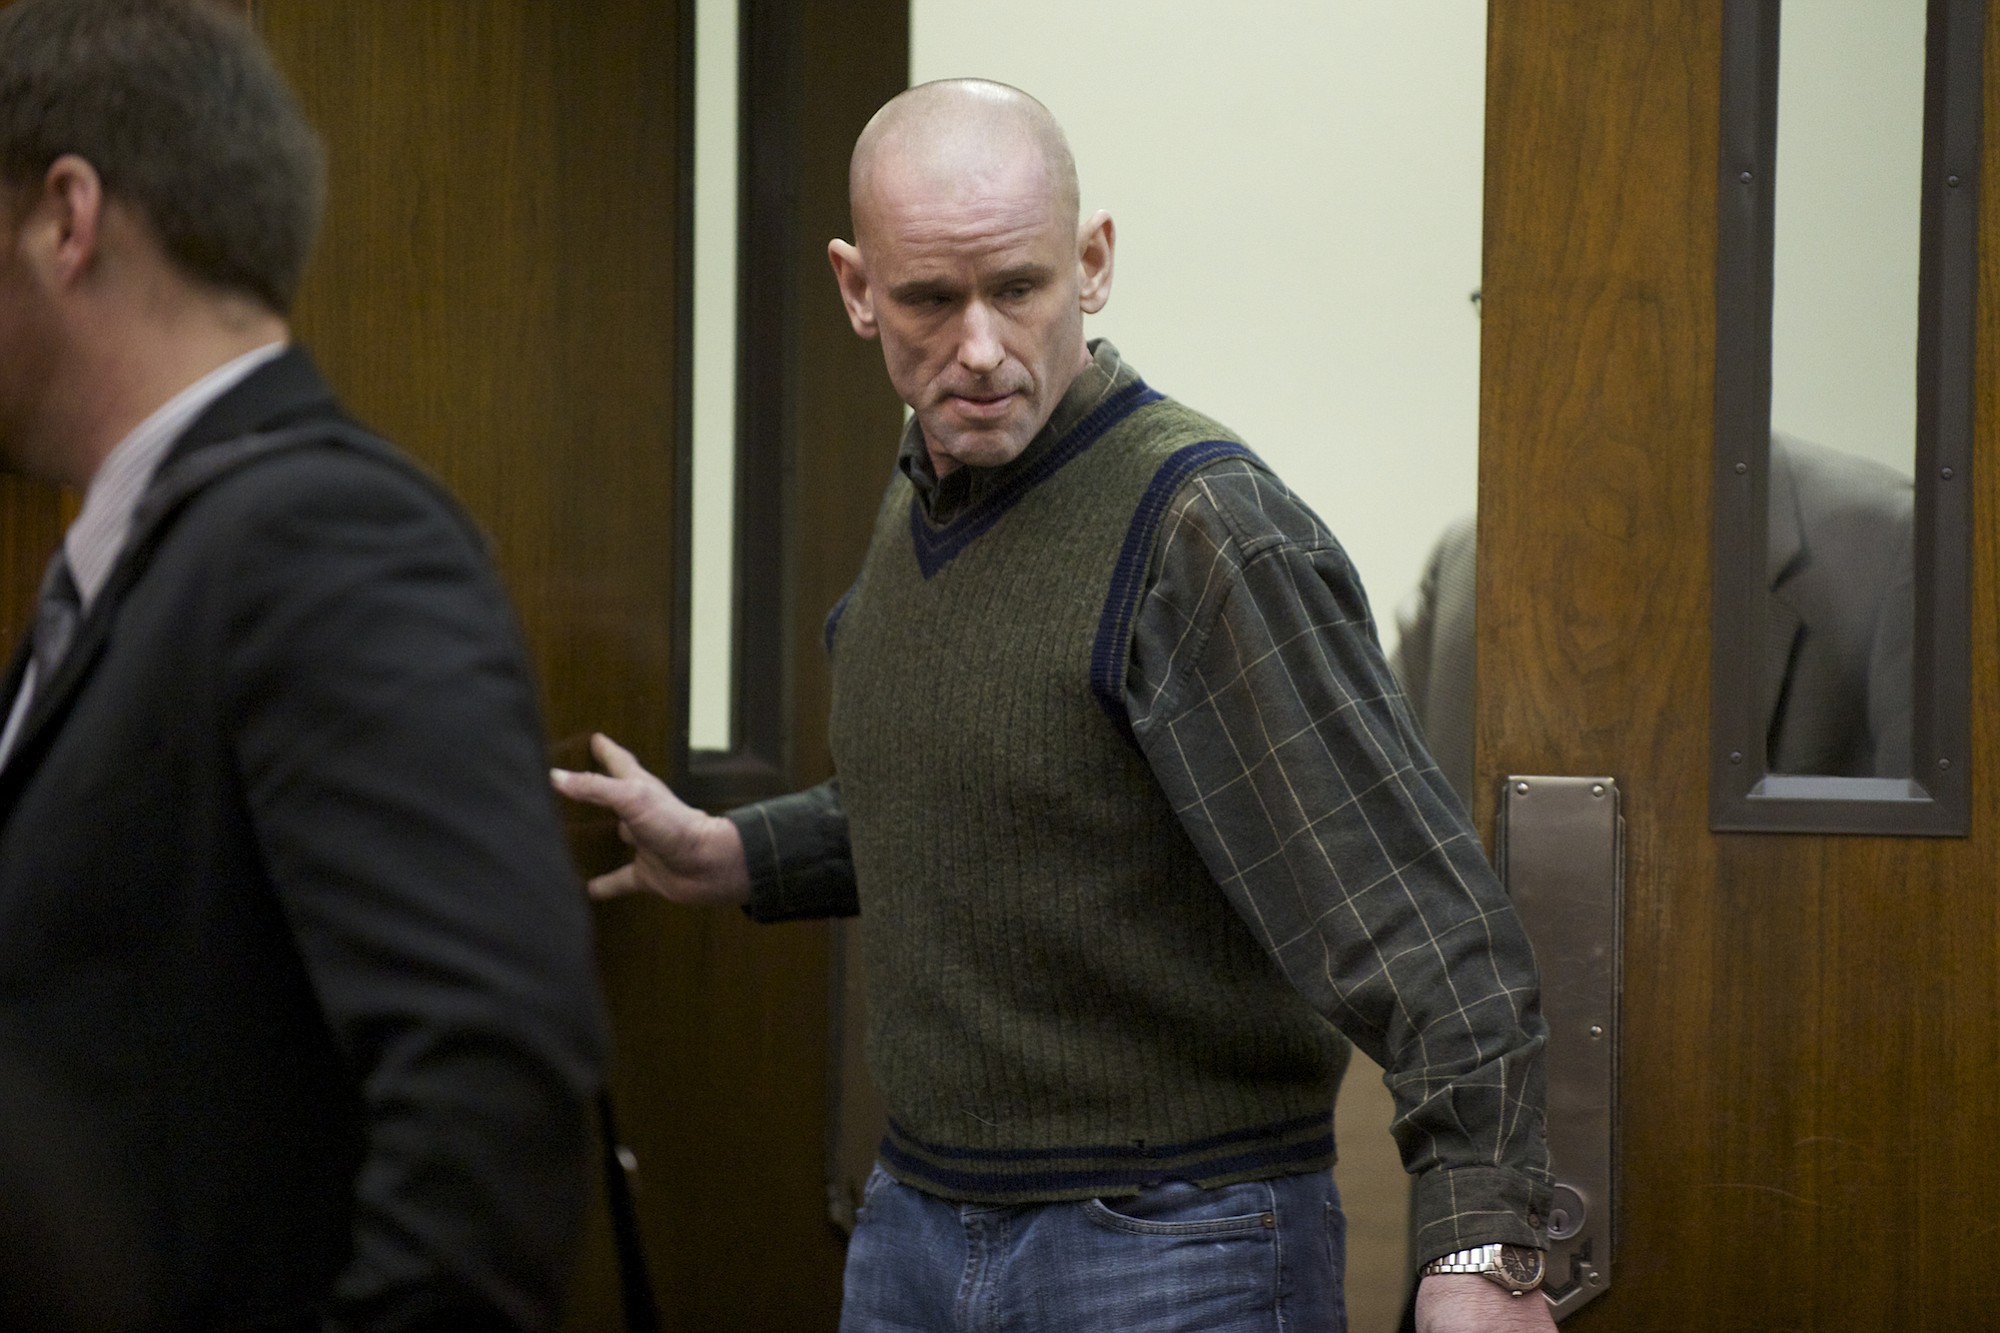 Scott R. Rowles appears in Clark County Superior Court on Jan. 7, 2014, in connection with the Dec. 17 death of pedestrian Donald L. Collins. Rowles was sentenced Tuesday for driving under the influence of marijuana. He reportedly had 7.2 nanograms per milliliter of THC - the active ingredient in marijuana - in his blood at the time of the crash.